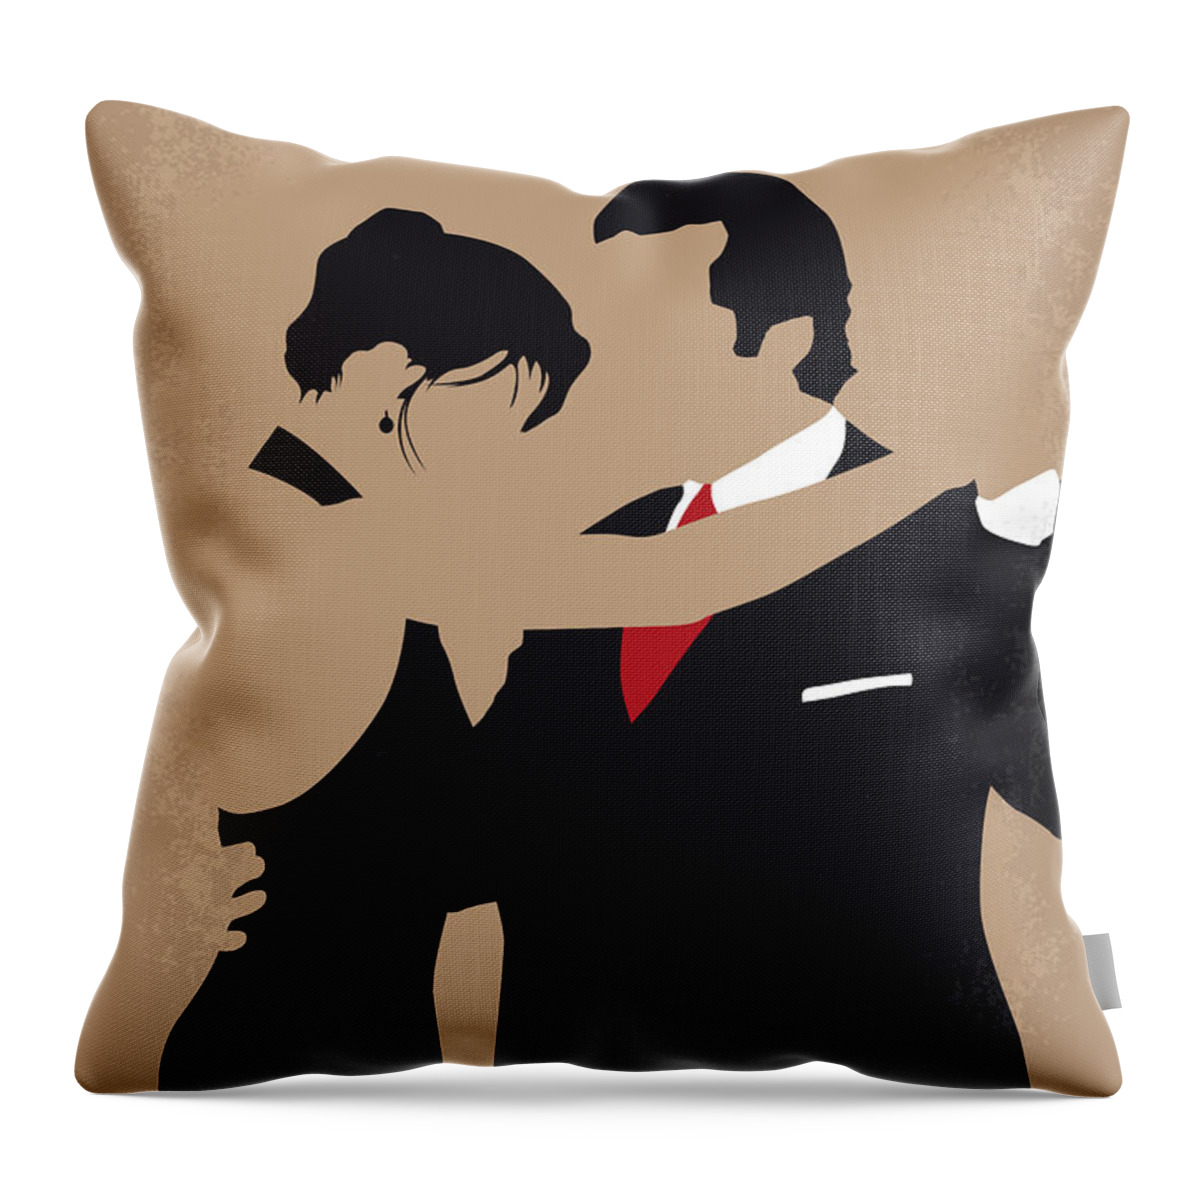 Scent Of A Woman Throw Pillow featuring the digital art No888 My Scent of a Woman minimal movie poster by Chungkong Art